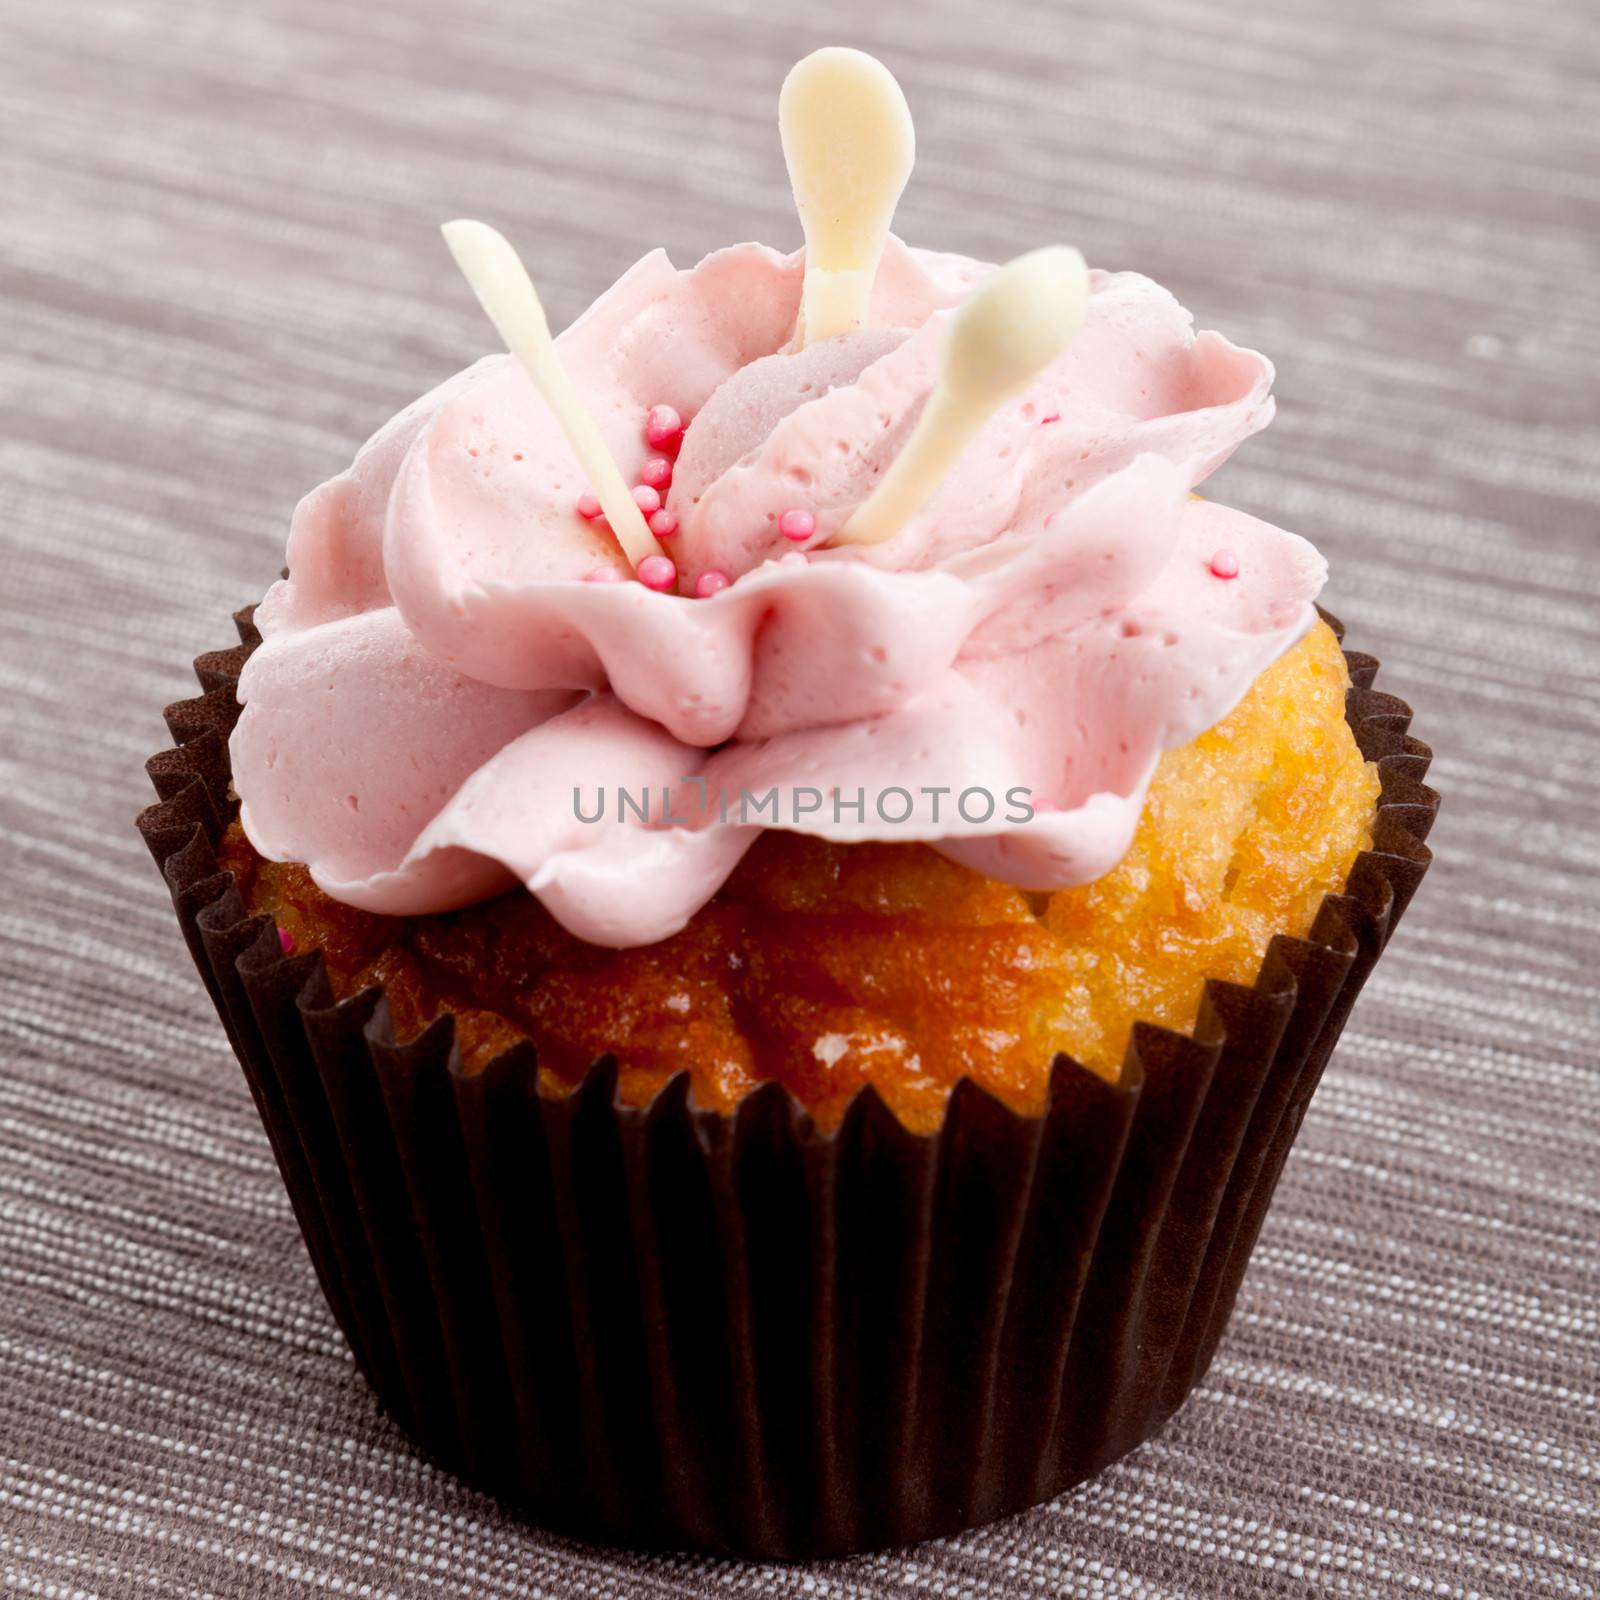 tasty sweet homemade cupcakes with cream on table food candy muffin